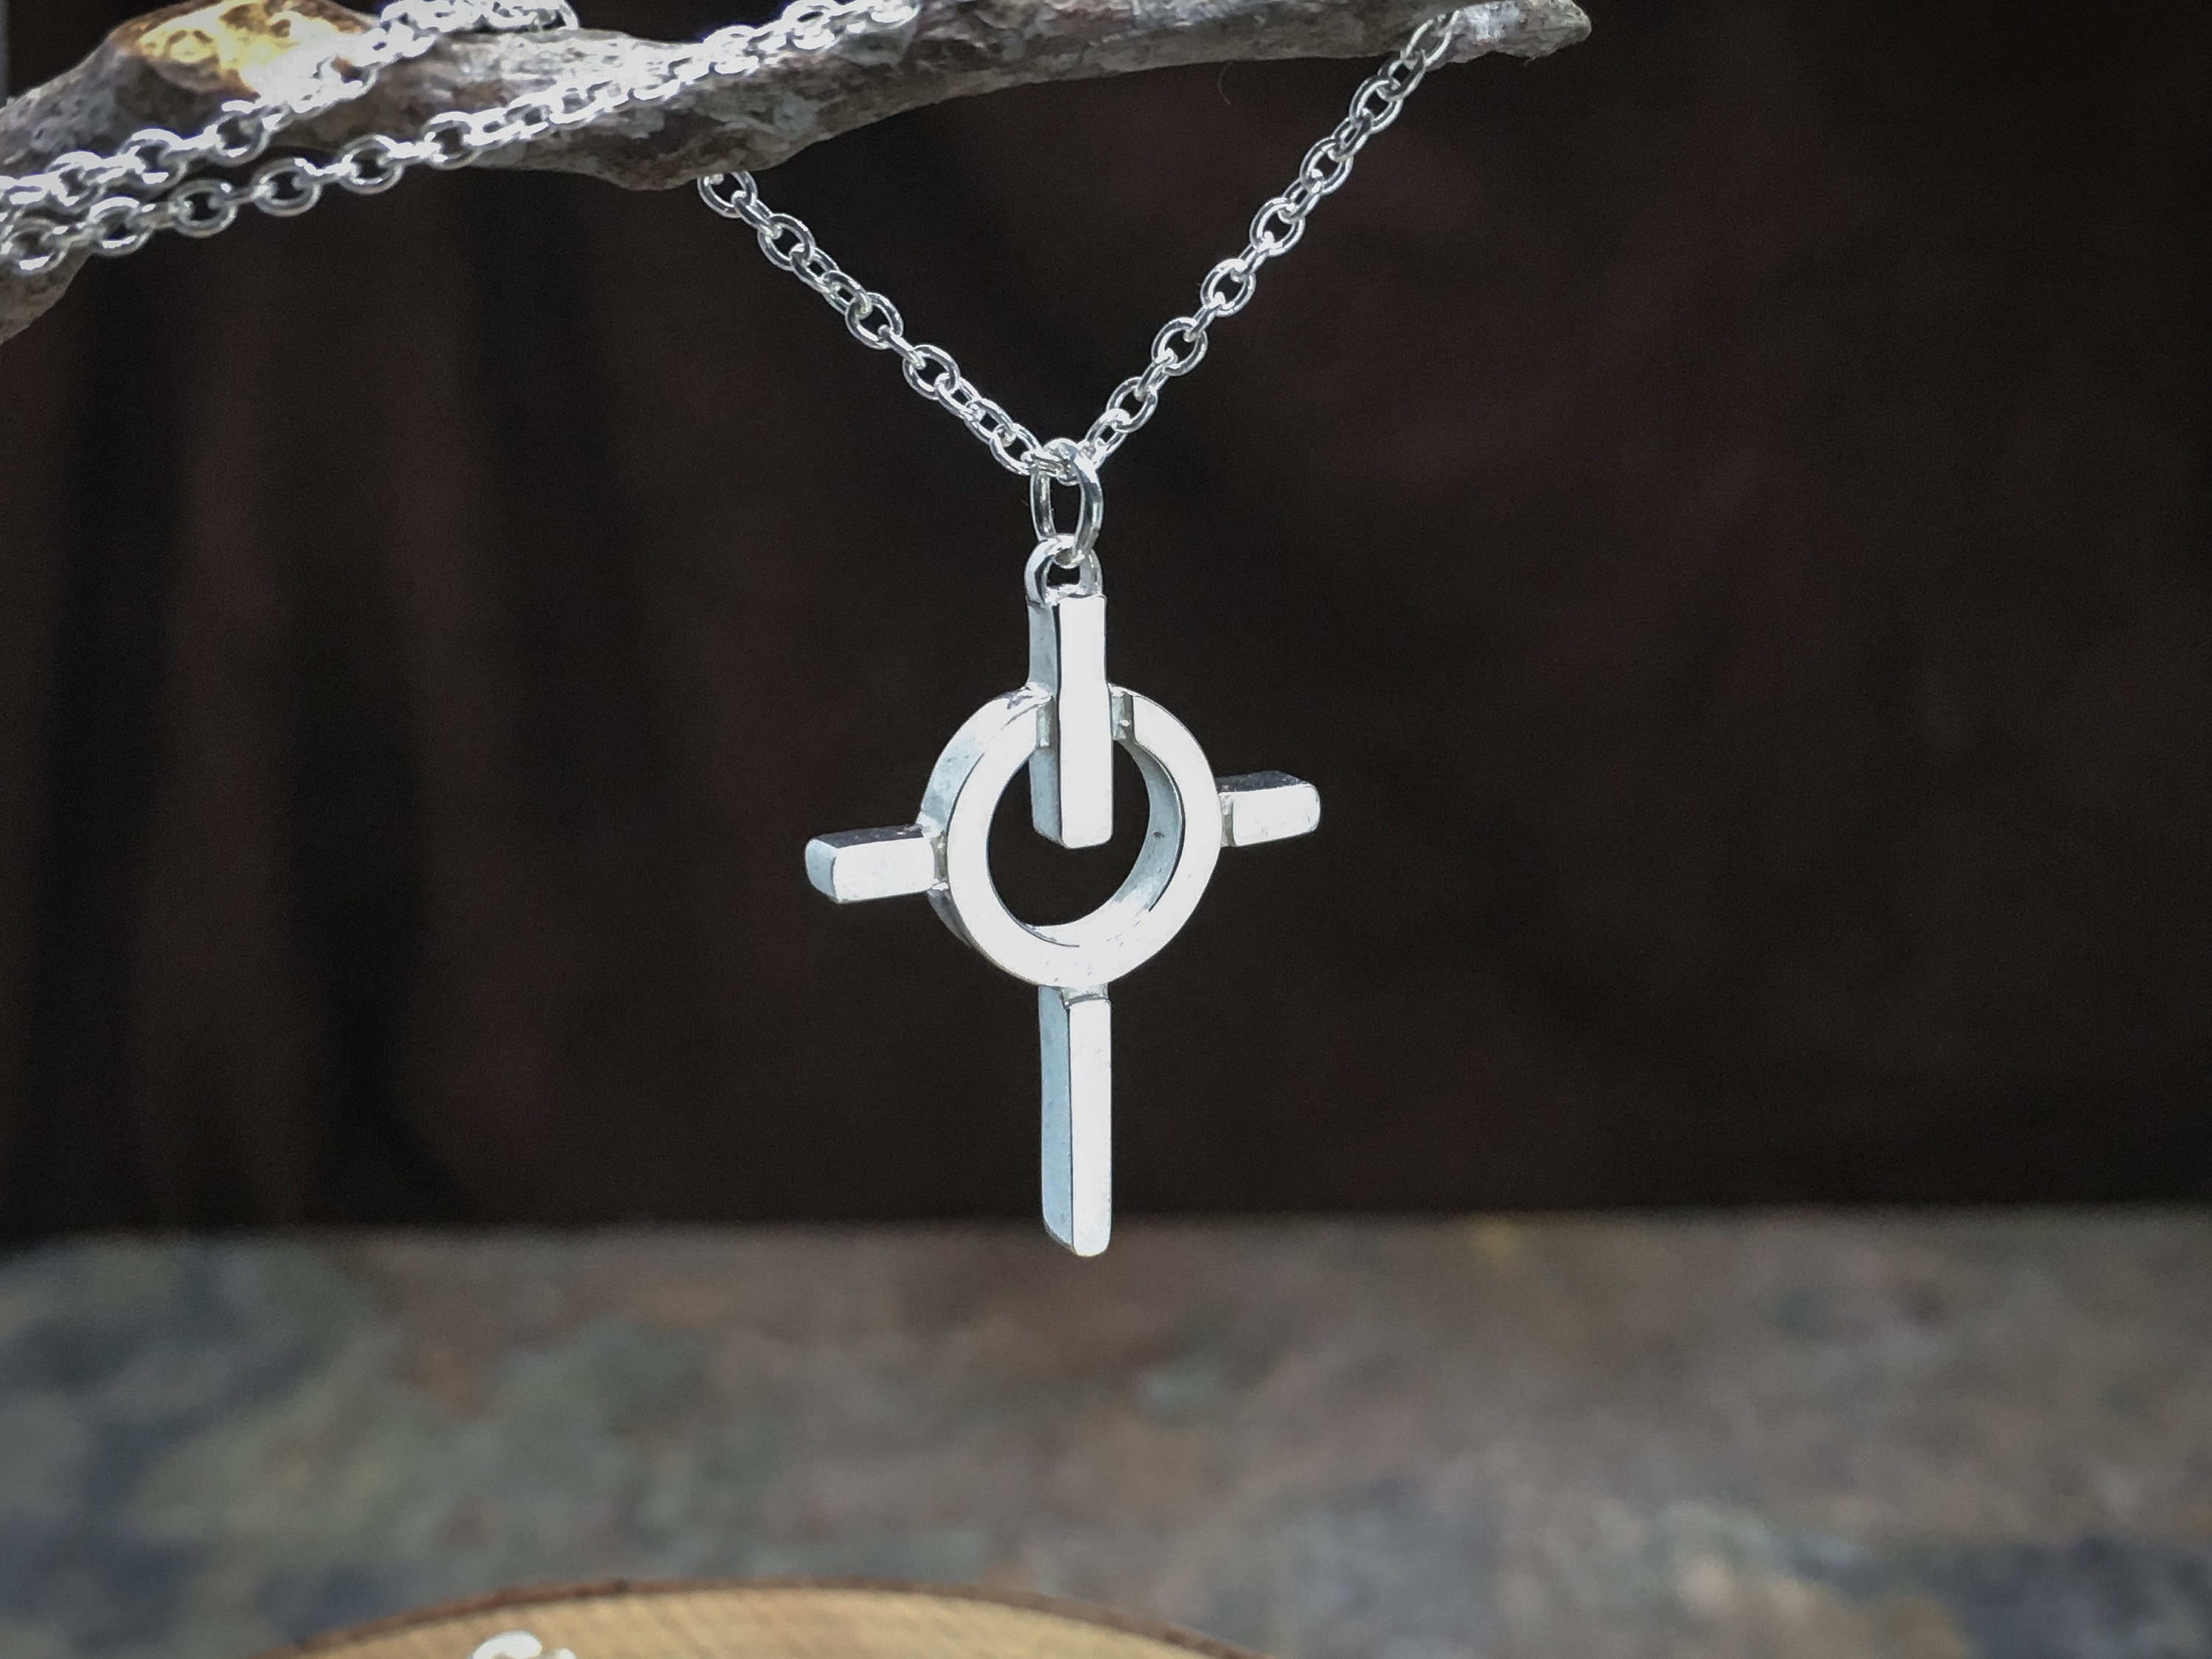 Power Cross Pendant and Necklace in solid Sterling Silver - Fine Jewelry Christian gifts, Communion gifts, men's cross and gifts for him!